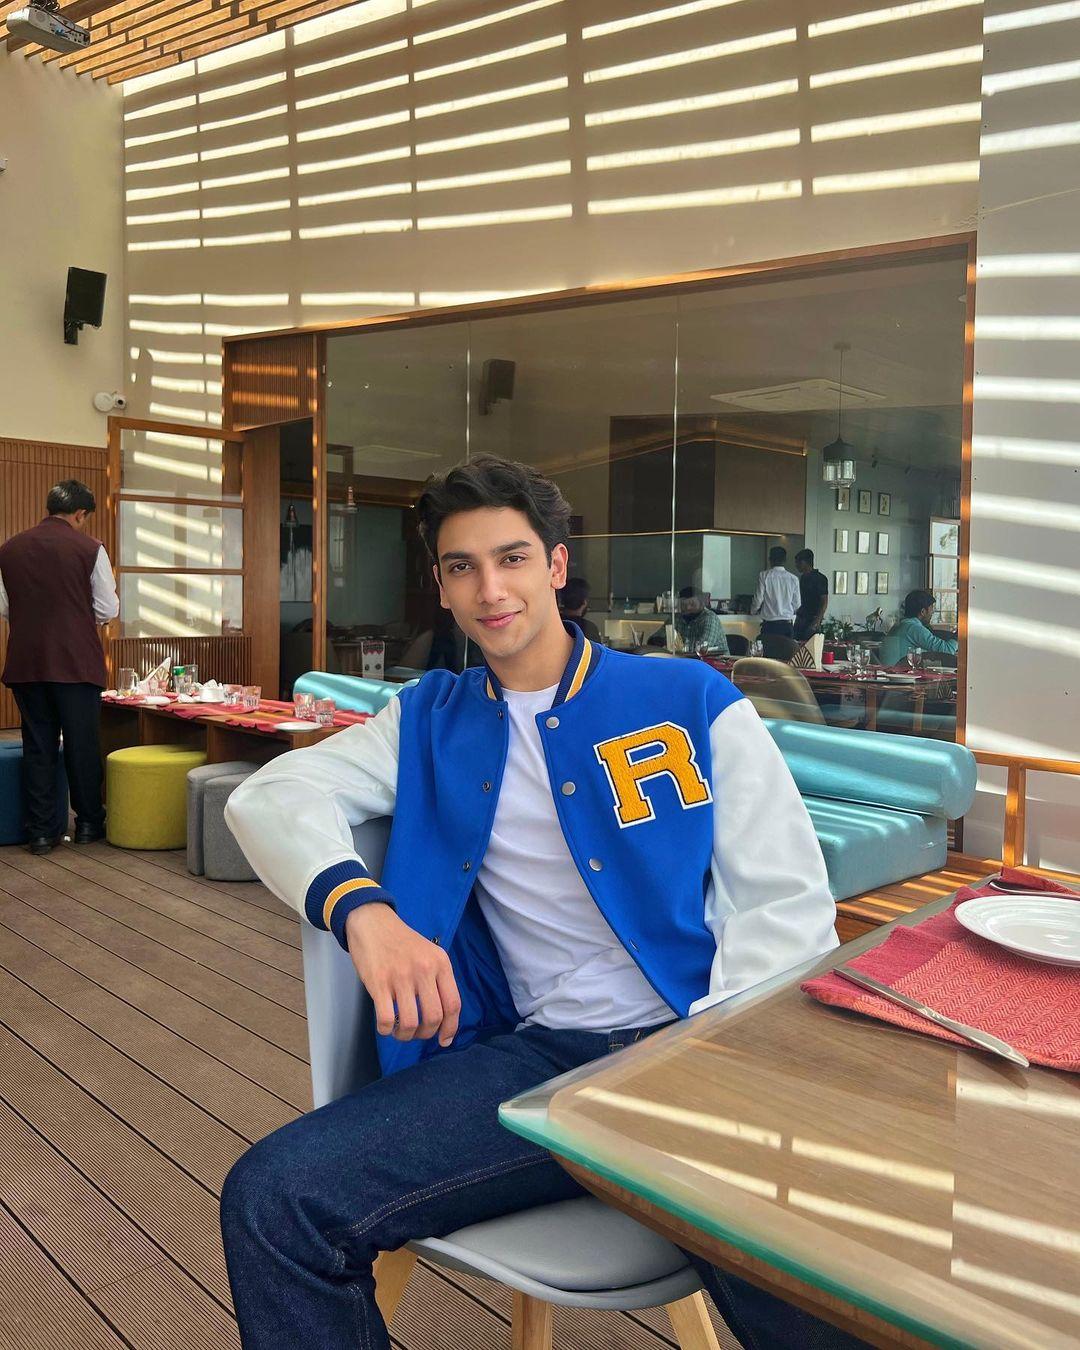 In a cool, casual vibe, Vedang effortlessly paired blue jeans with a crisp white t-shirt. Adding a touch of flair, he rocked a varsity jacket boasting varying shades of blue